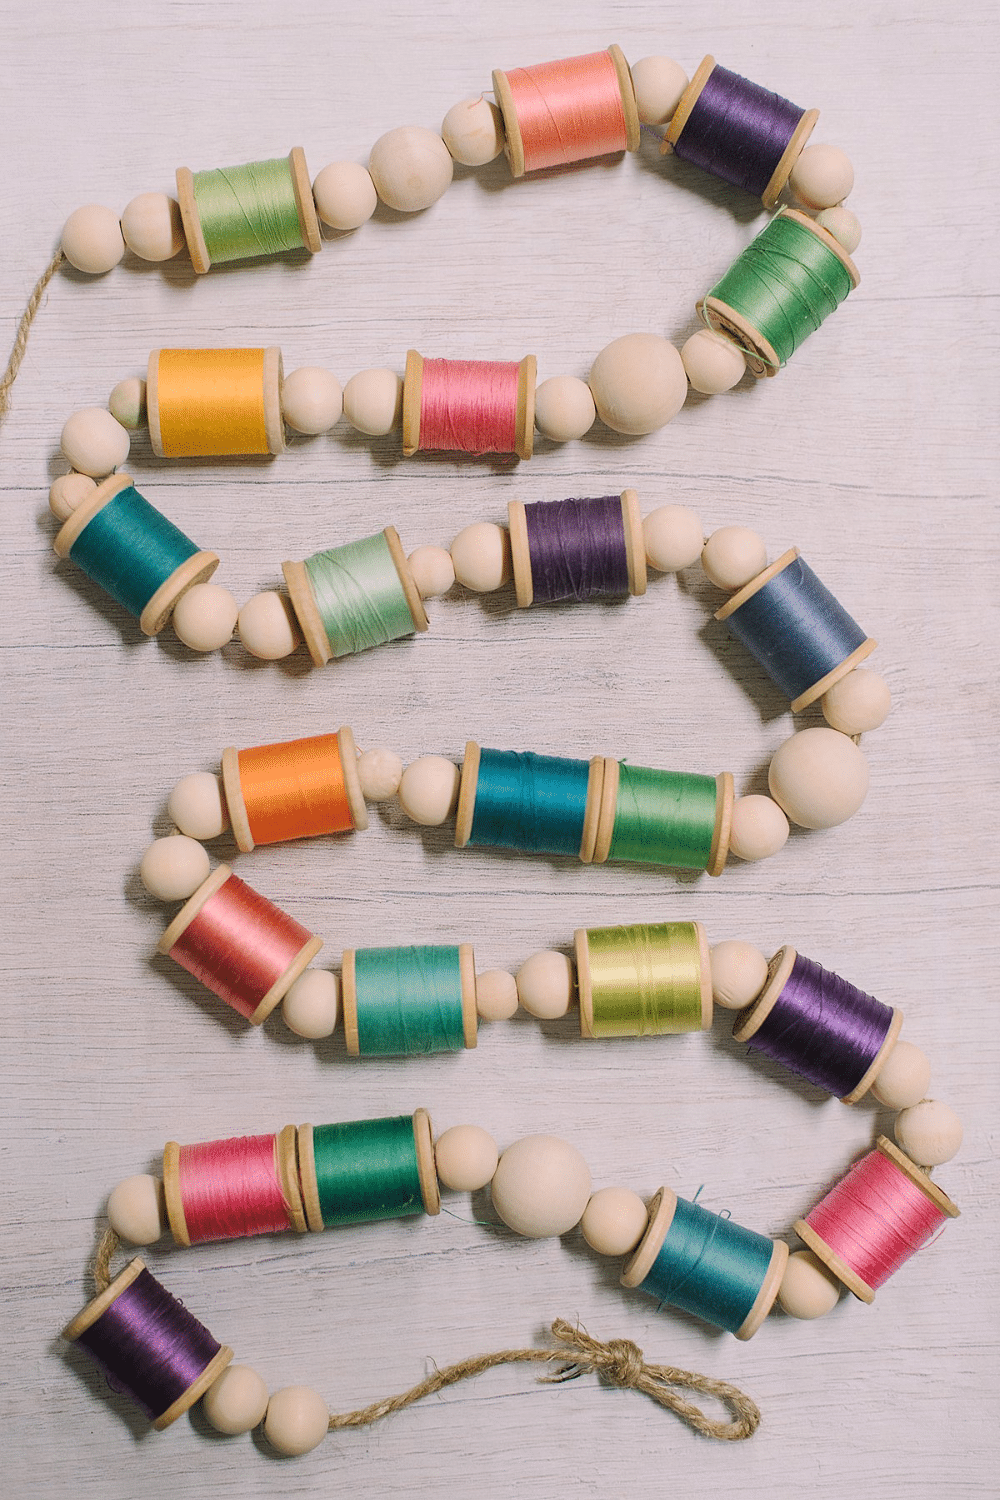 DIY Colorful Garland with Spools of Thread and Wooden Beads